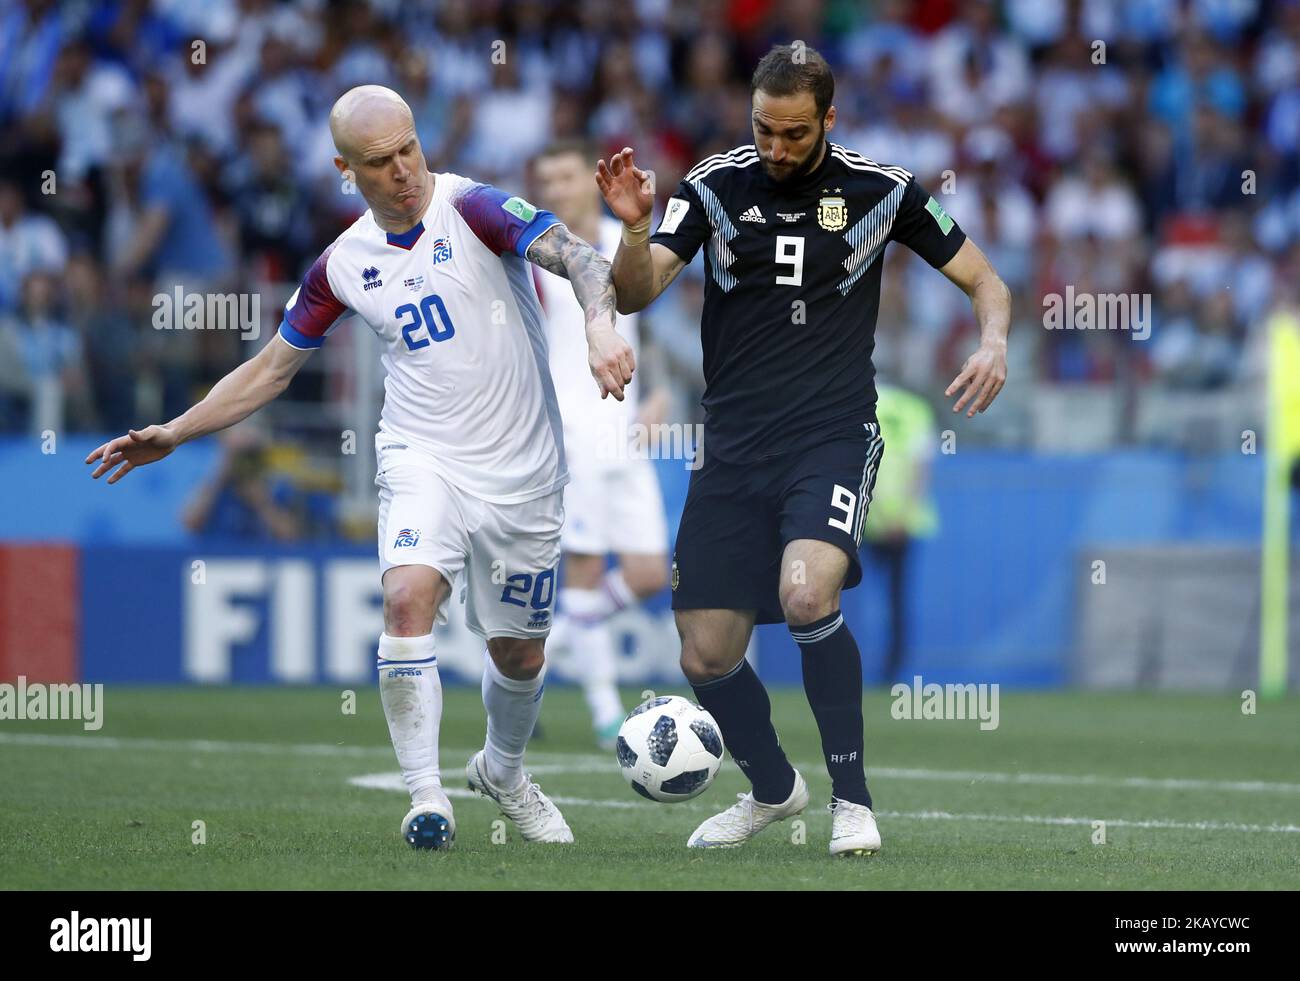 Emil Hallfredsson (Iceland) and Gonzalo Higuain (Argentina) during the 2018 FIFA World Cup Russia group D match between Argentina and Iceland at the Spartak Stadium on June 16, 2018 in Moscow, Russia. (Photo by Matteo Ciambelli/NurPhoto) Stock Photo